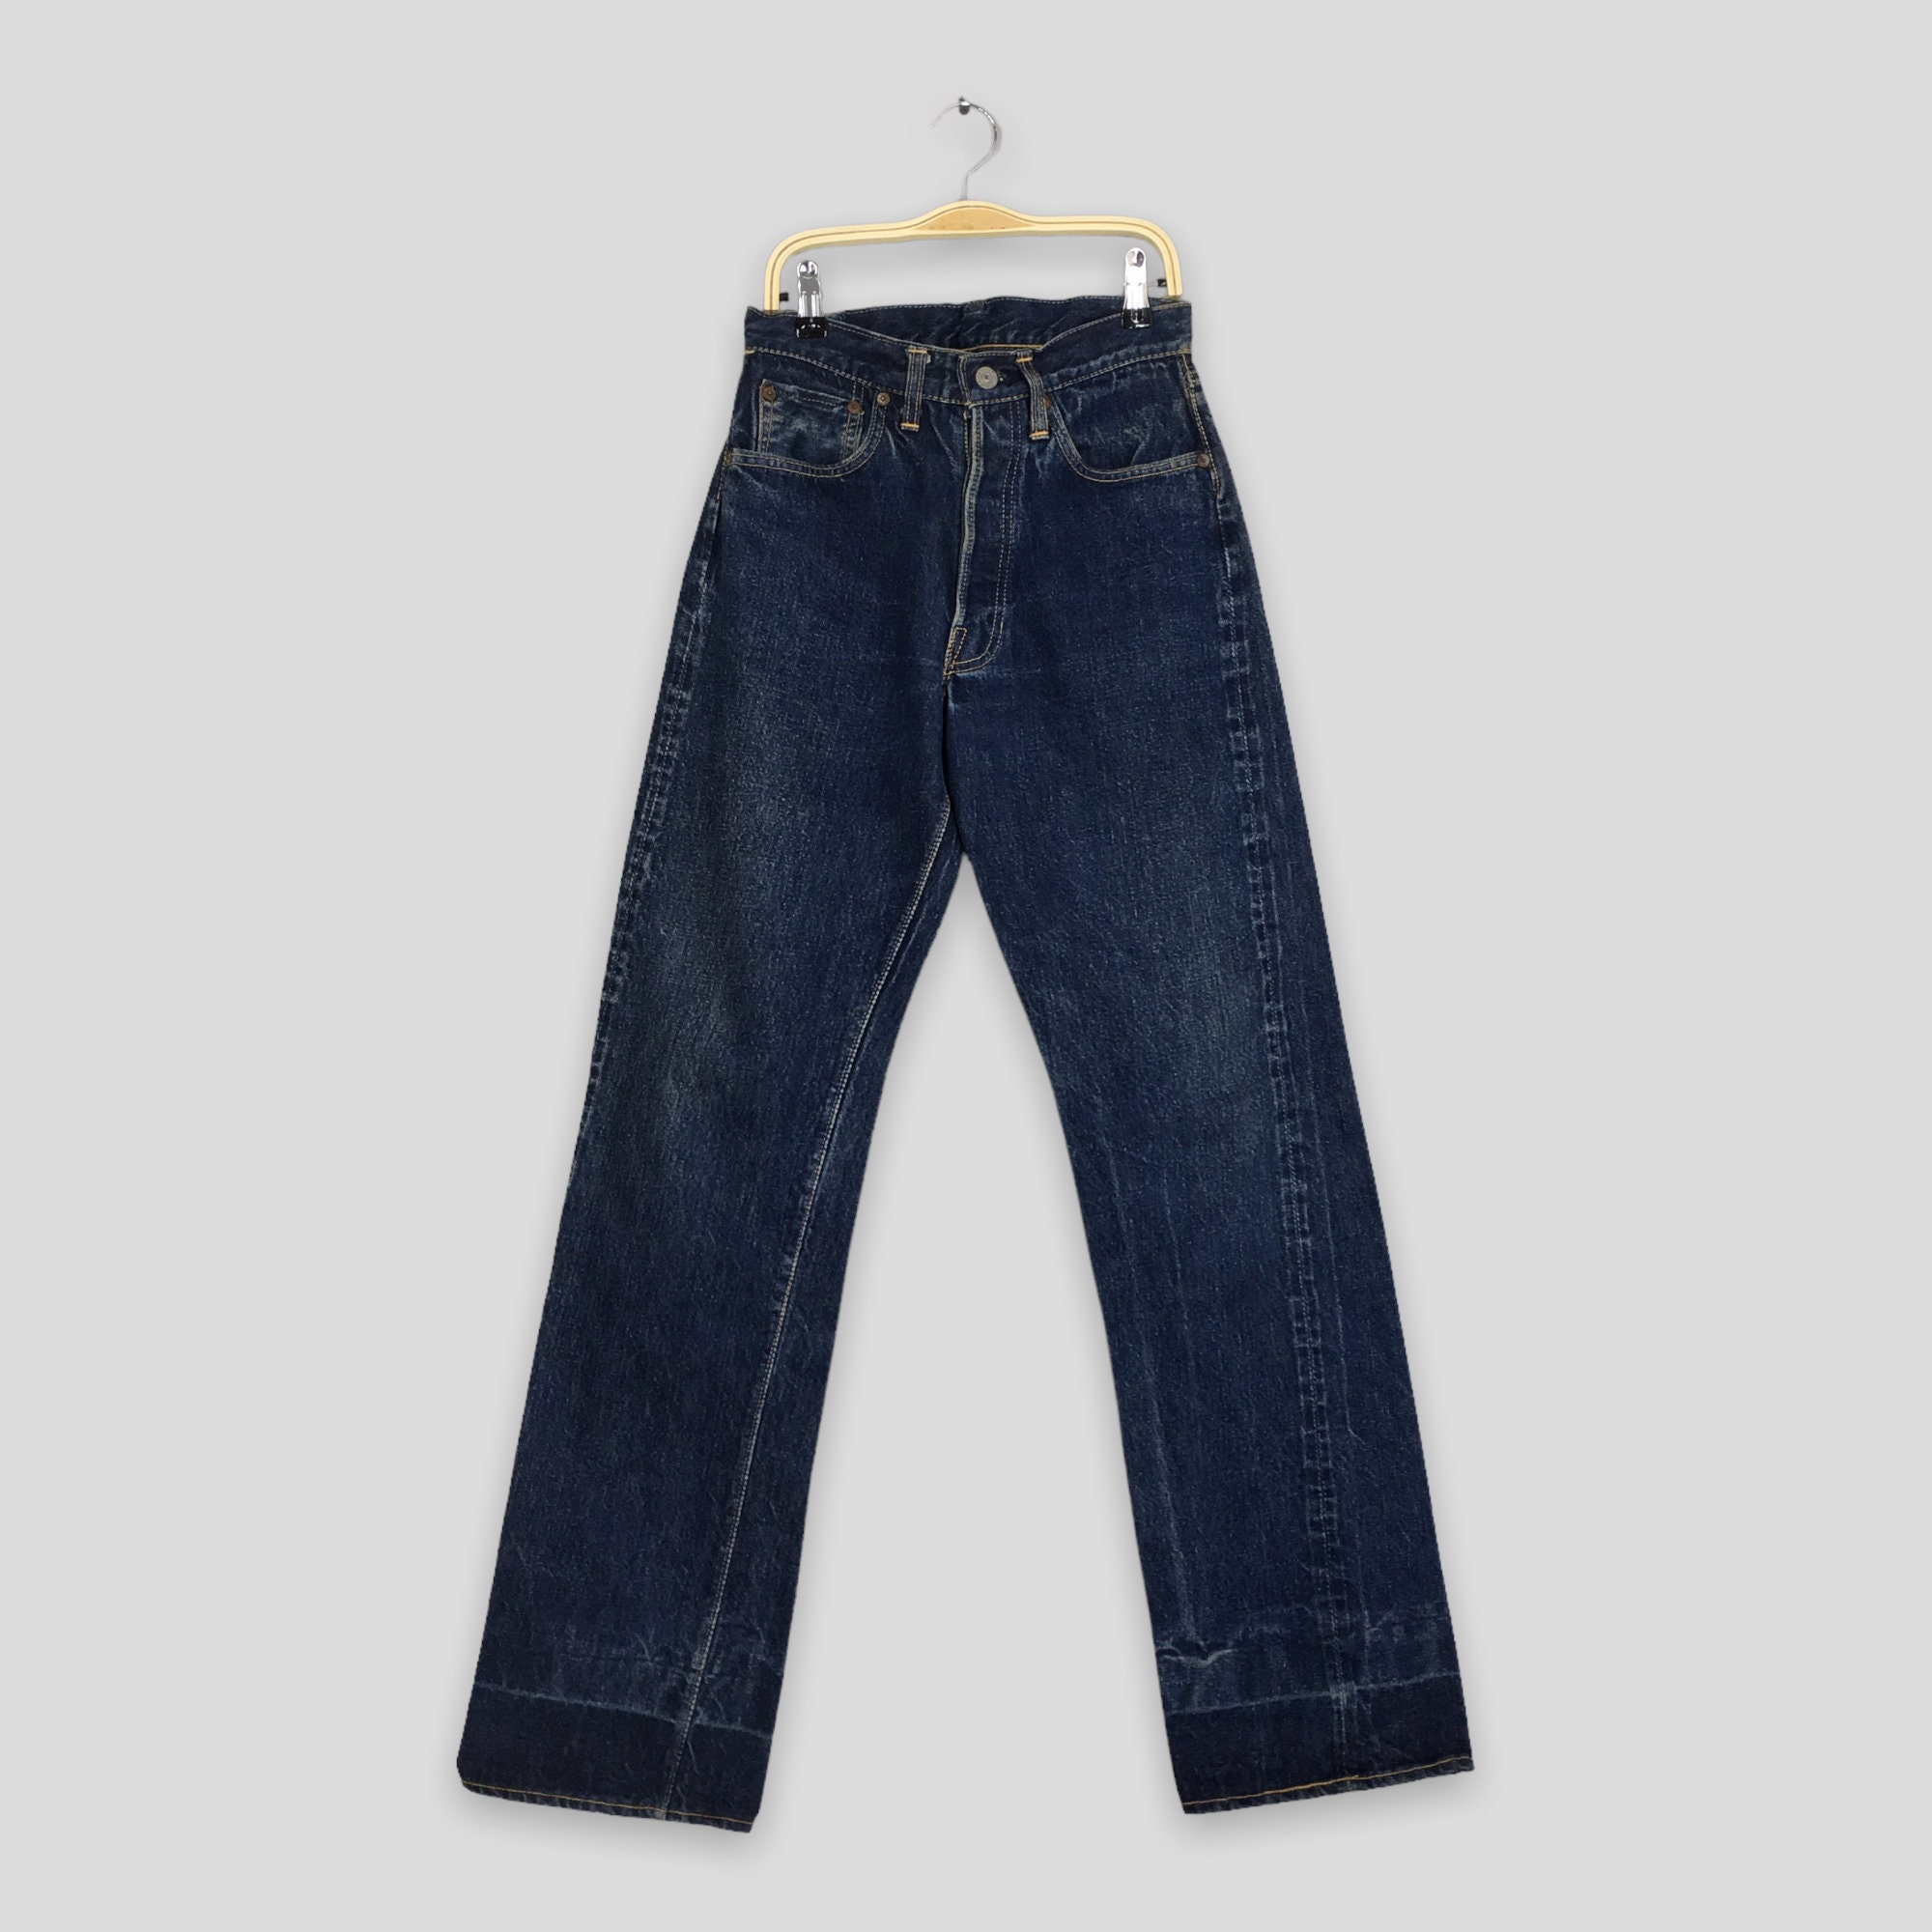 Levis 503b Jeans - Etsy Canada